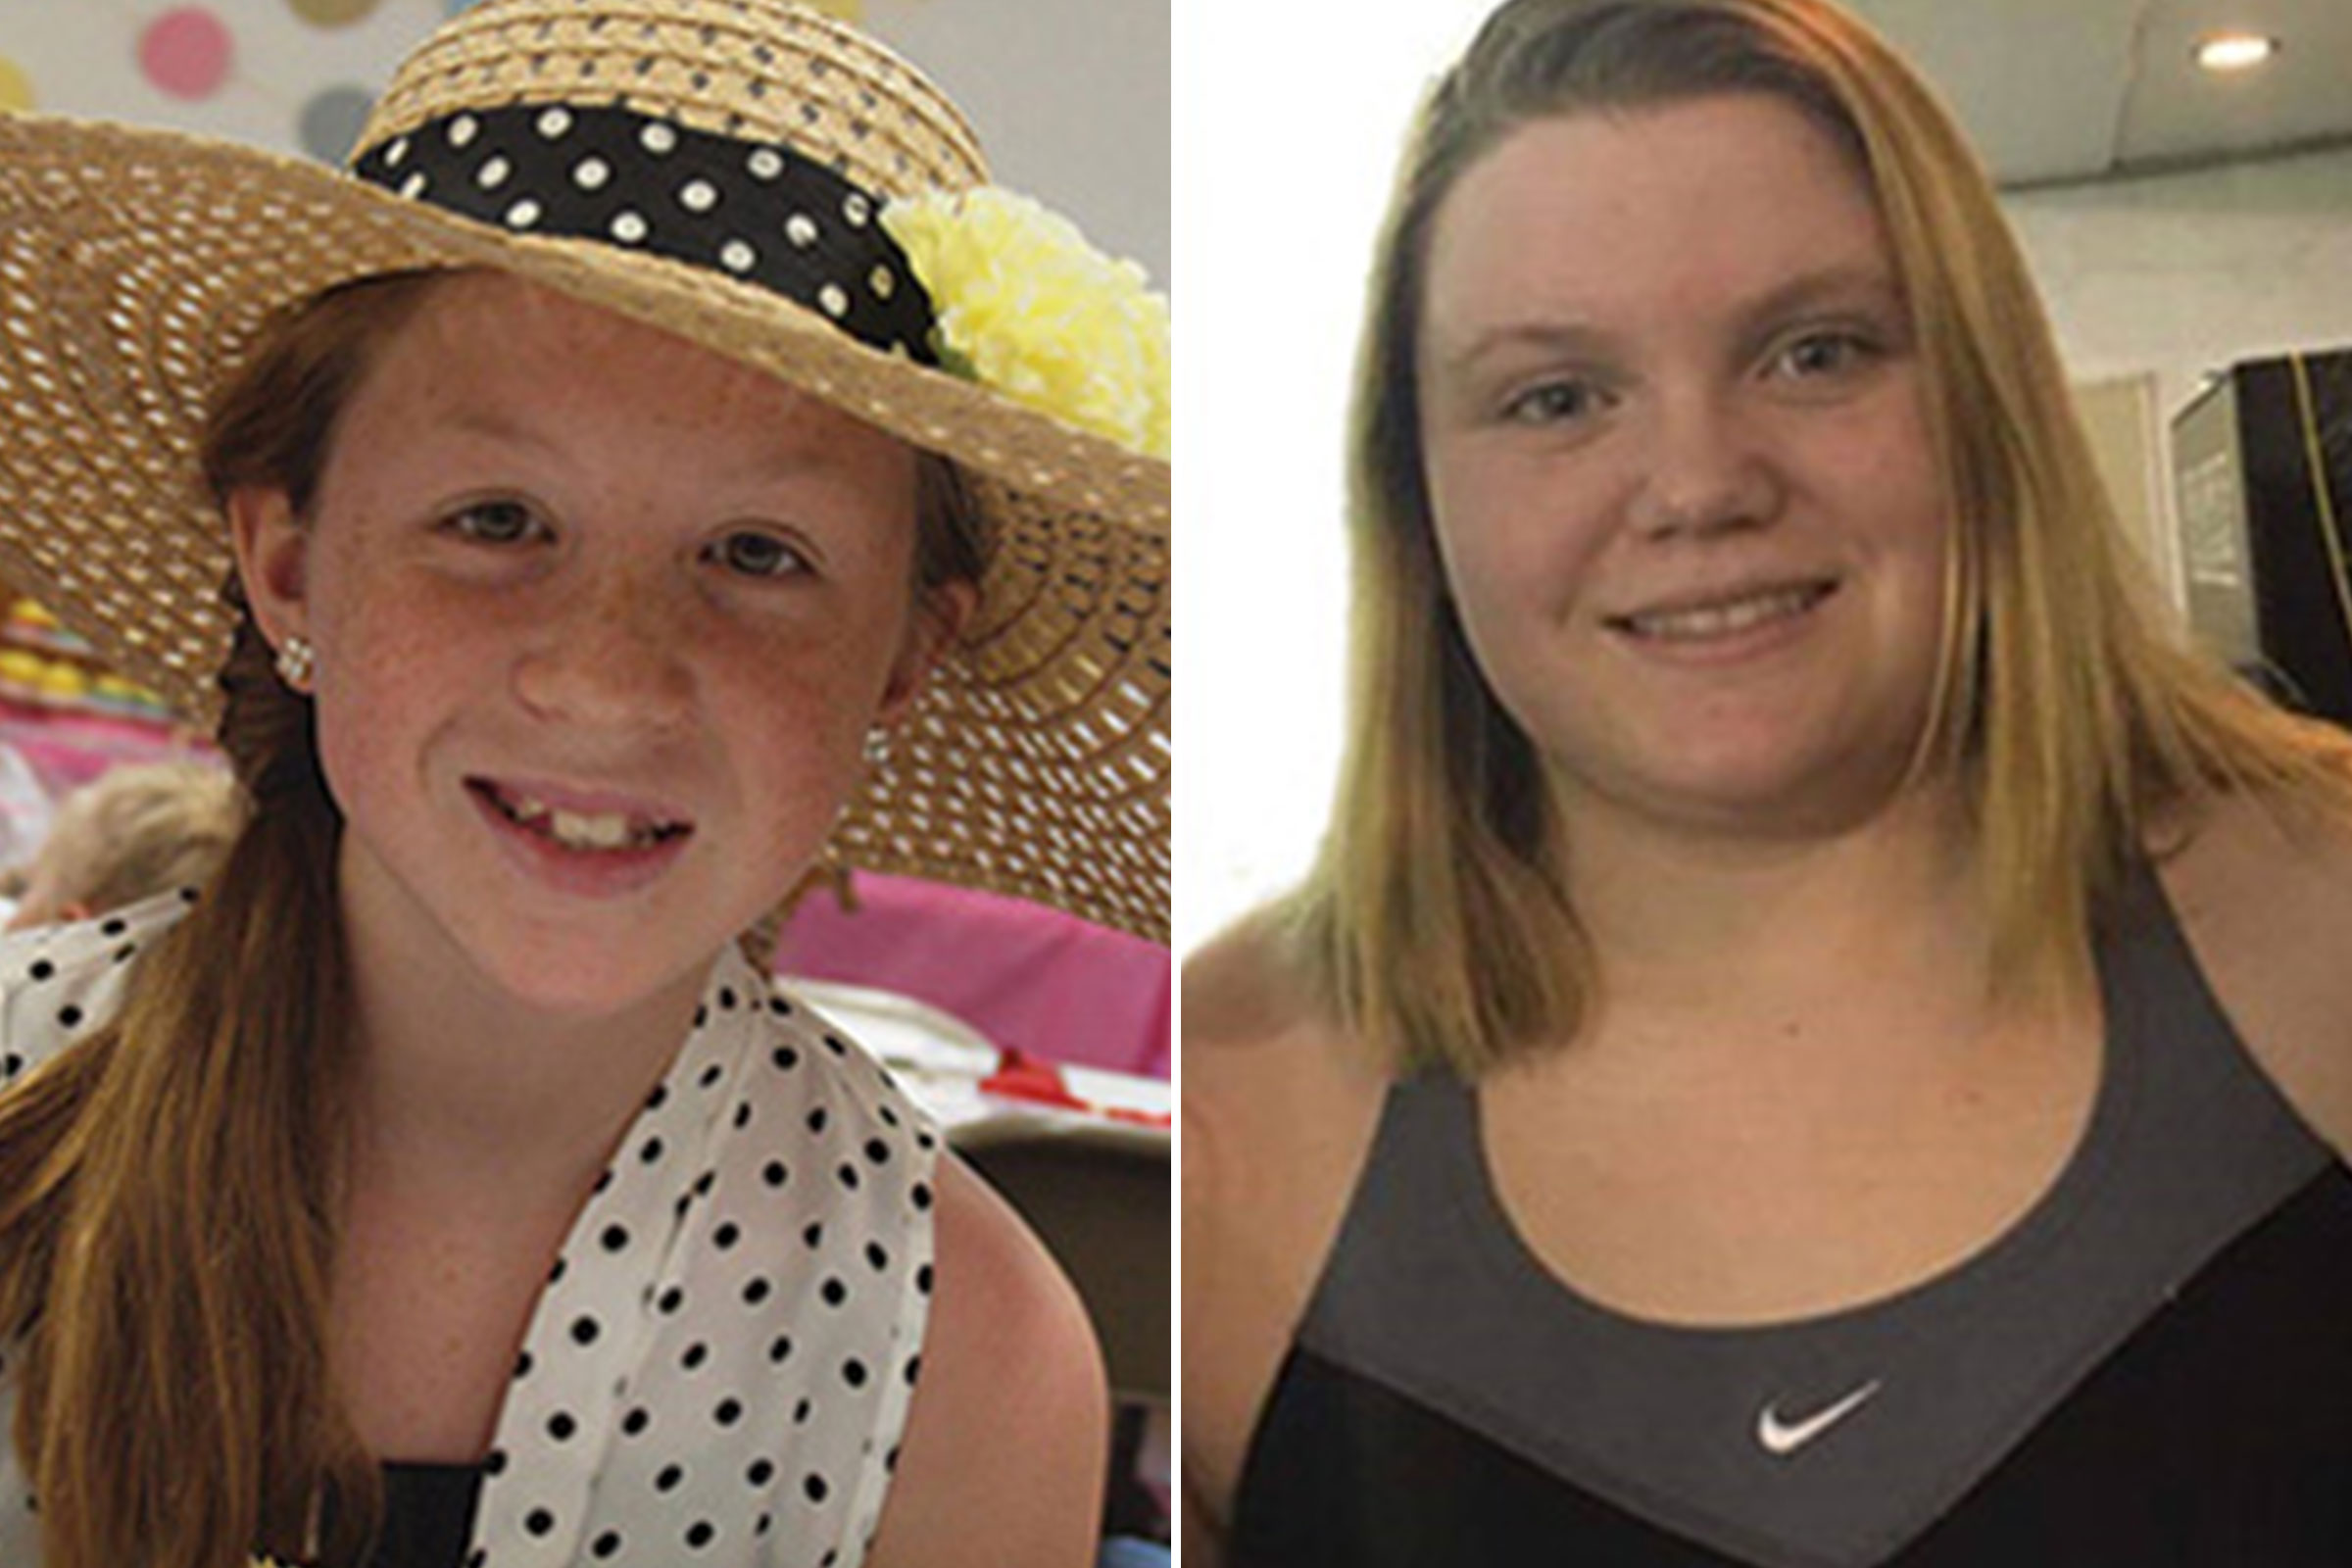 Abigail Williams, 13, (left) and Liberty German, 14 (right), were found dead in February 2017 in the small town of Delphi, Ind. (Indiana State Police)